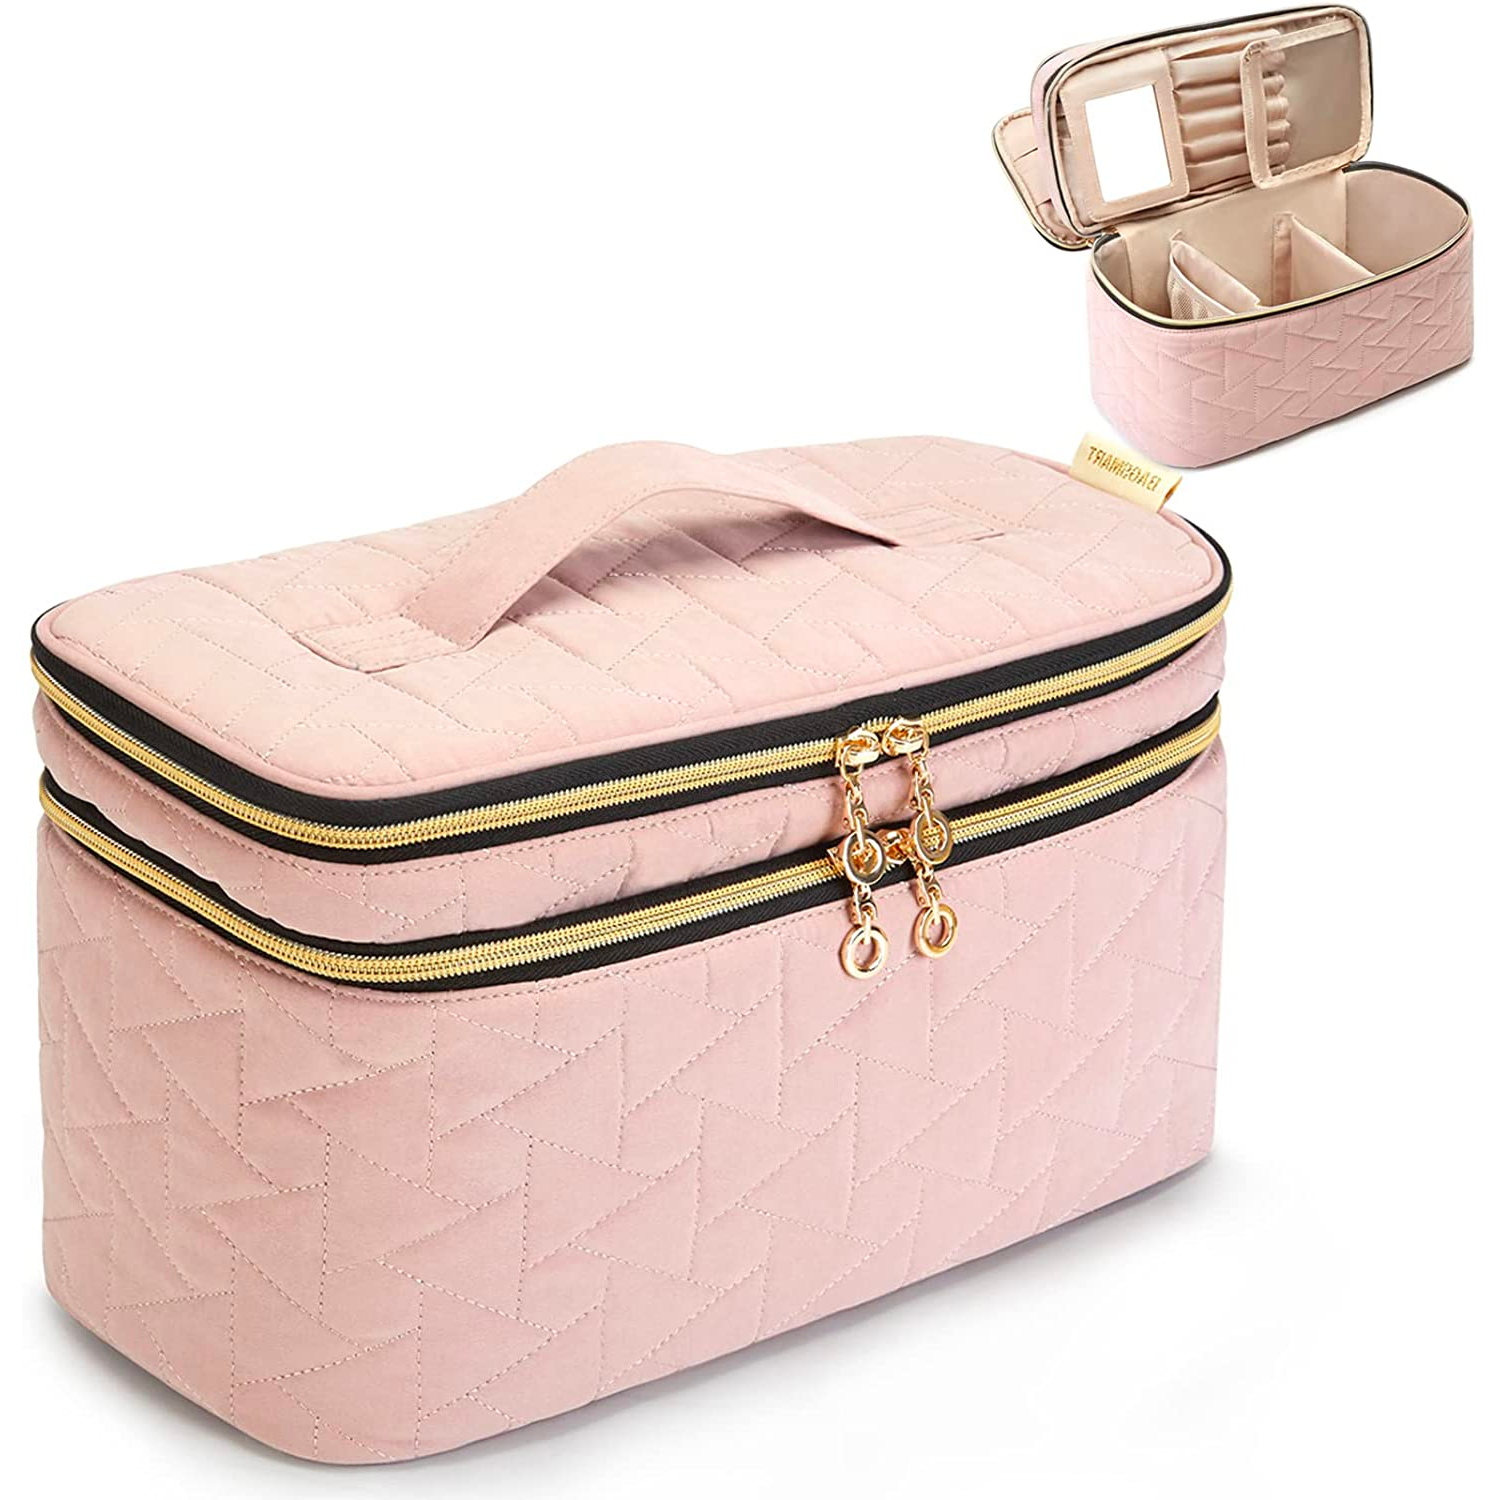 Details more than 87 makeup bags with compartments - in.cdgdbentre